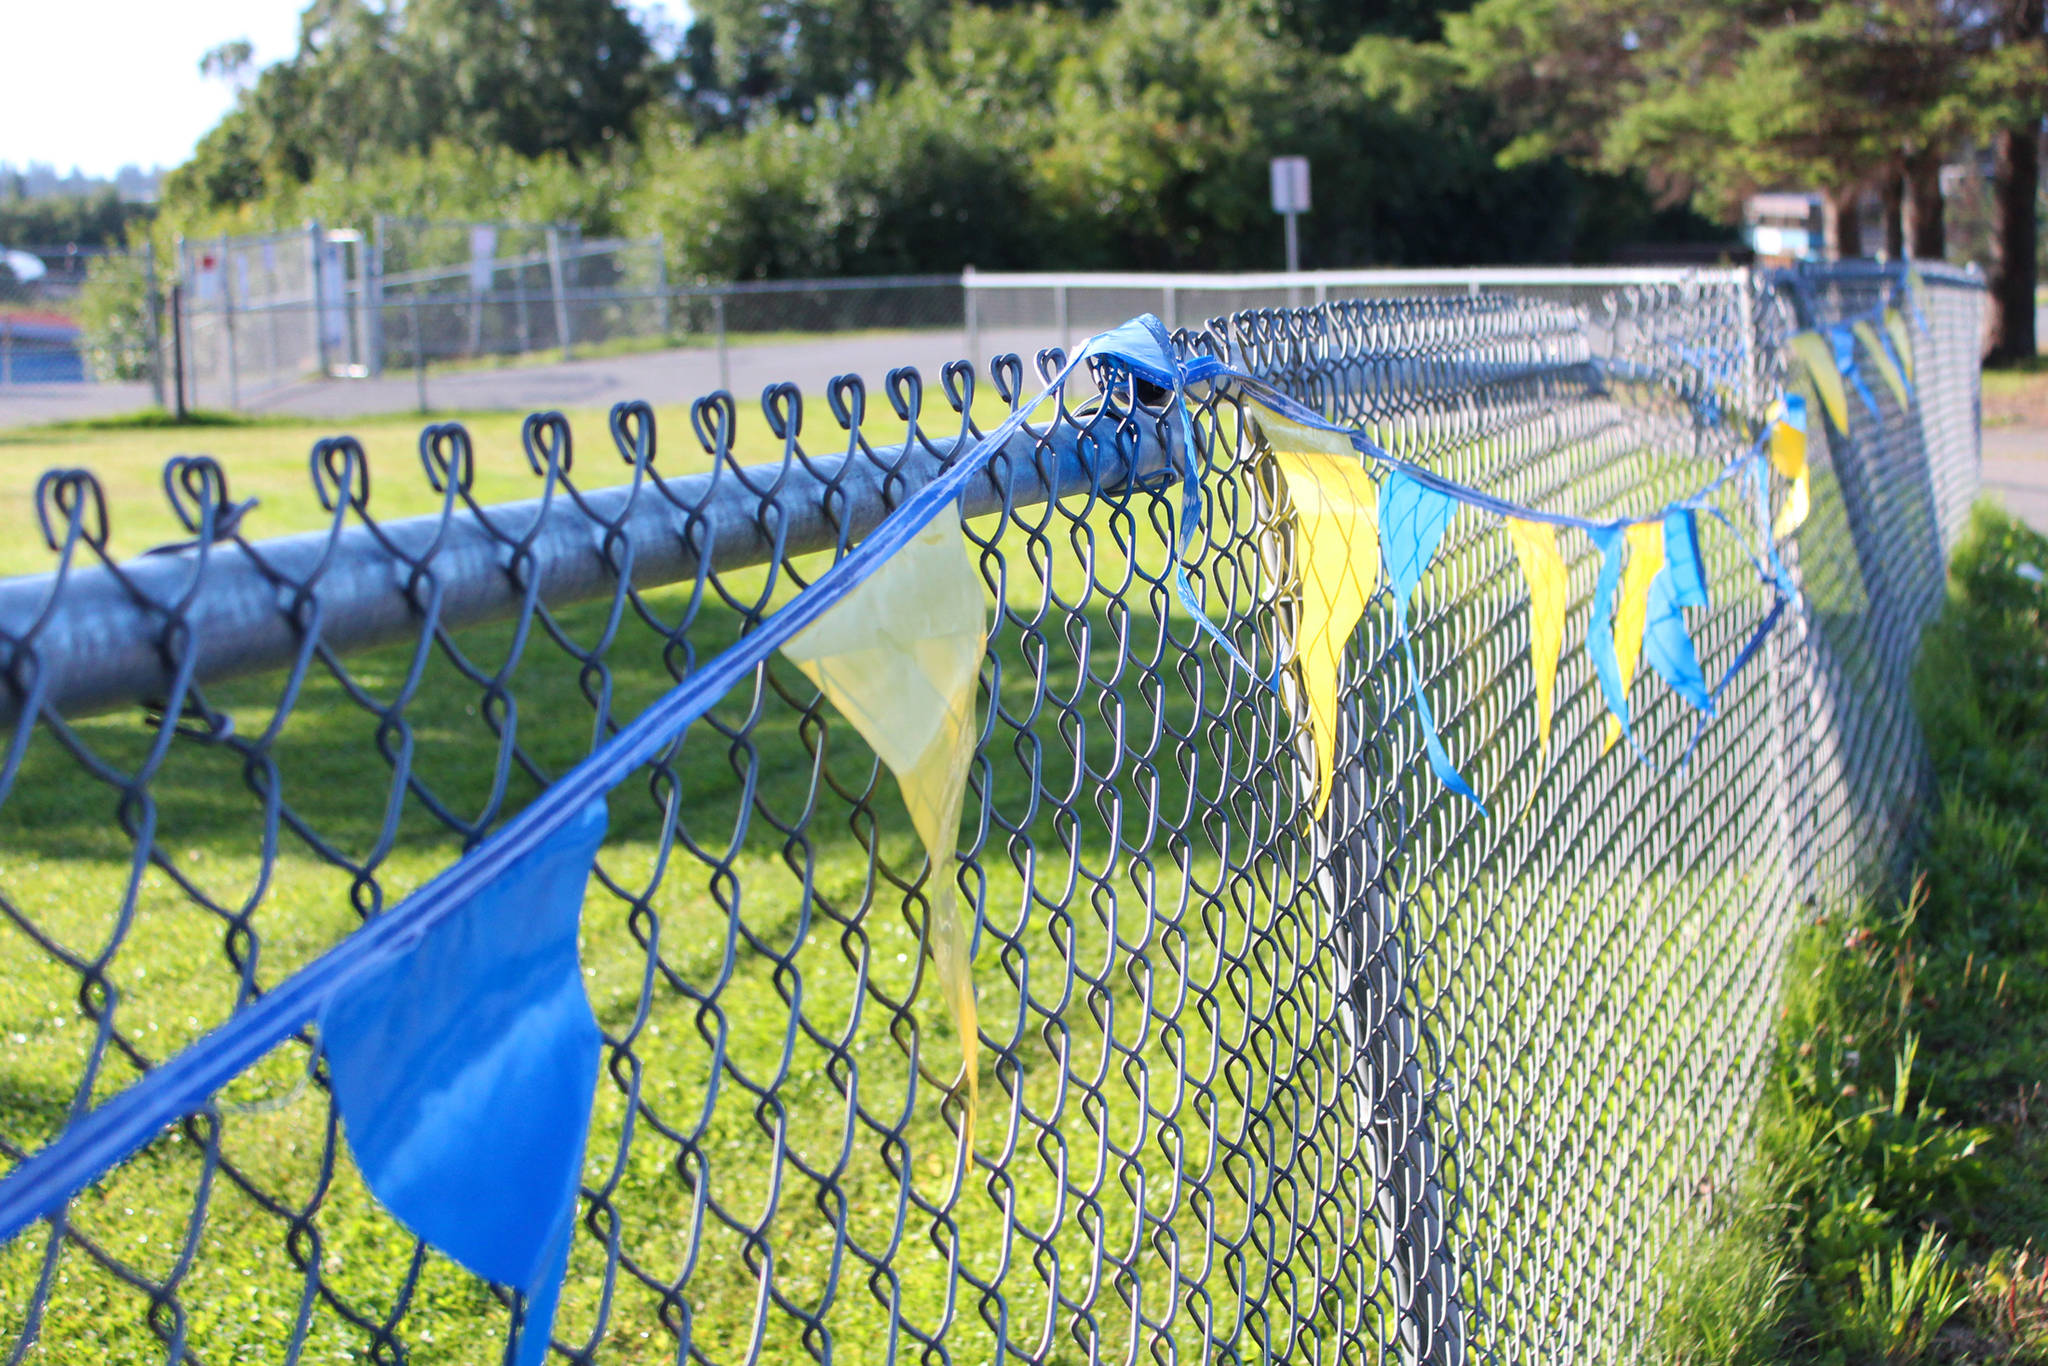 Flags decorate a fence near the finish line of the Homer Mariner Triathlon on Saturday, Sept. 1, 2018 at Homer High School in Homer, Alaska. (Photo by Megan Pacer/Homer News)